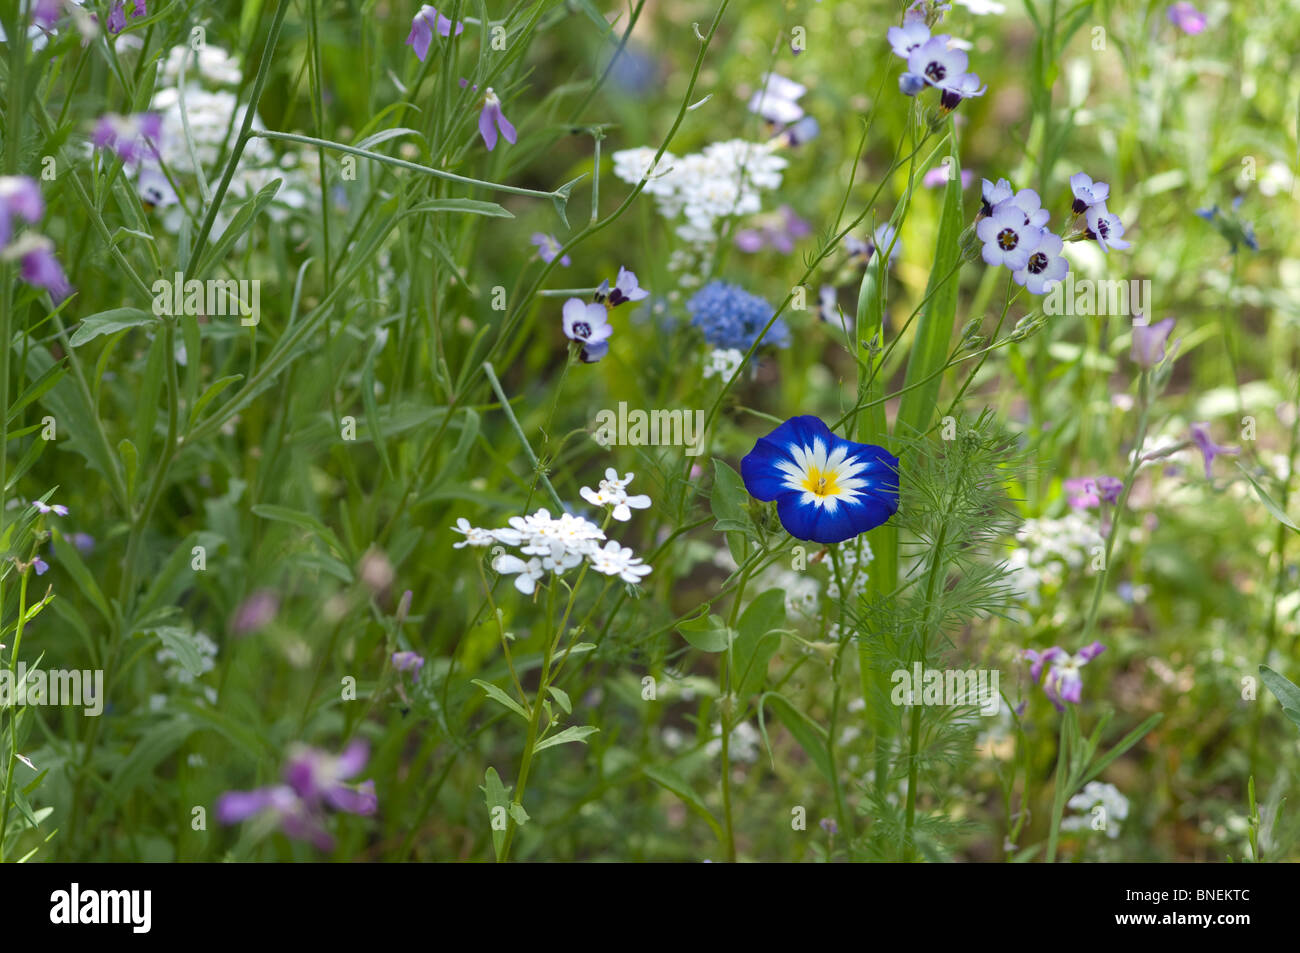 Mini meadow of annual flowers, Dwarf Morning Glory 'Blue Ensign' stands out among the smaller flowers Stock Photo